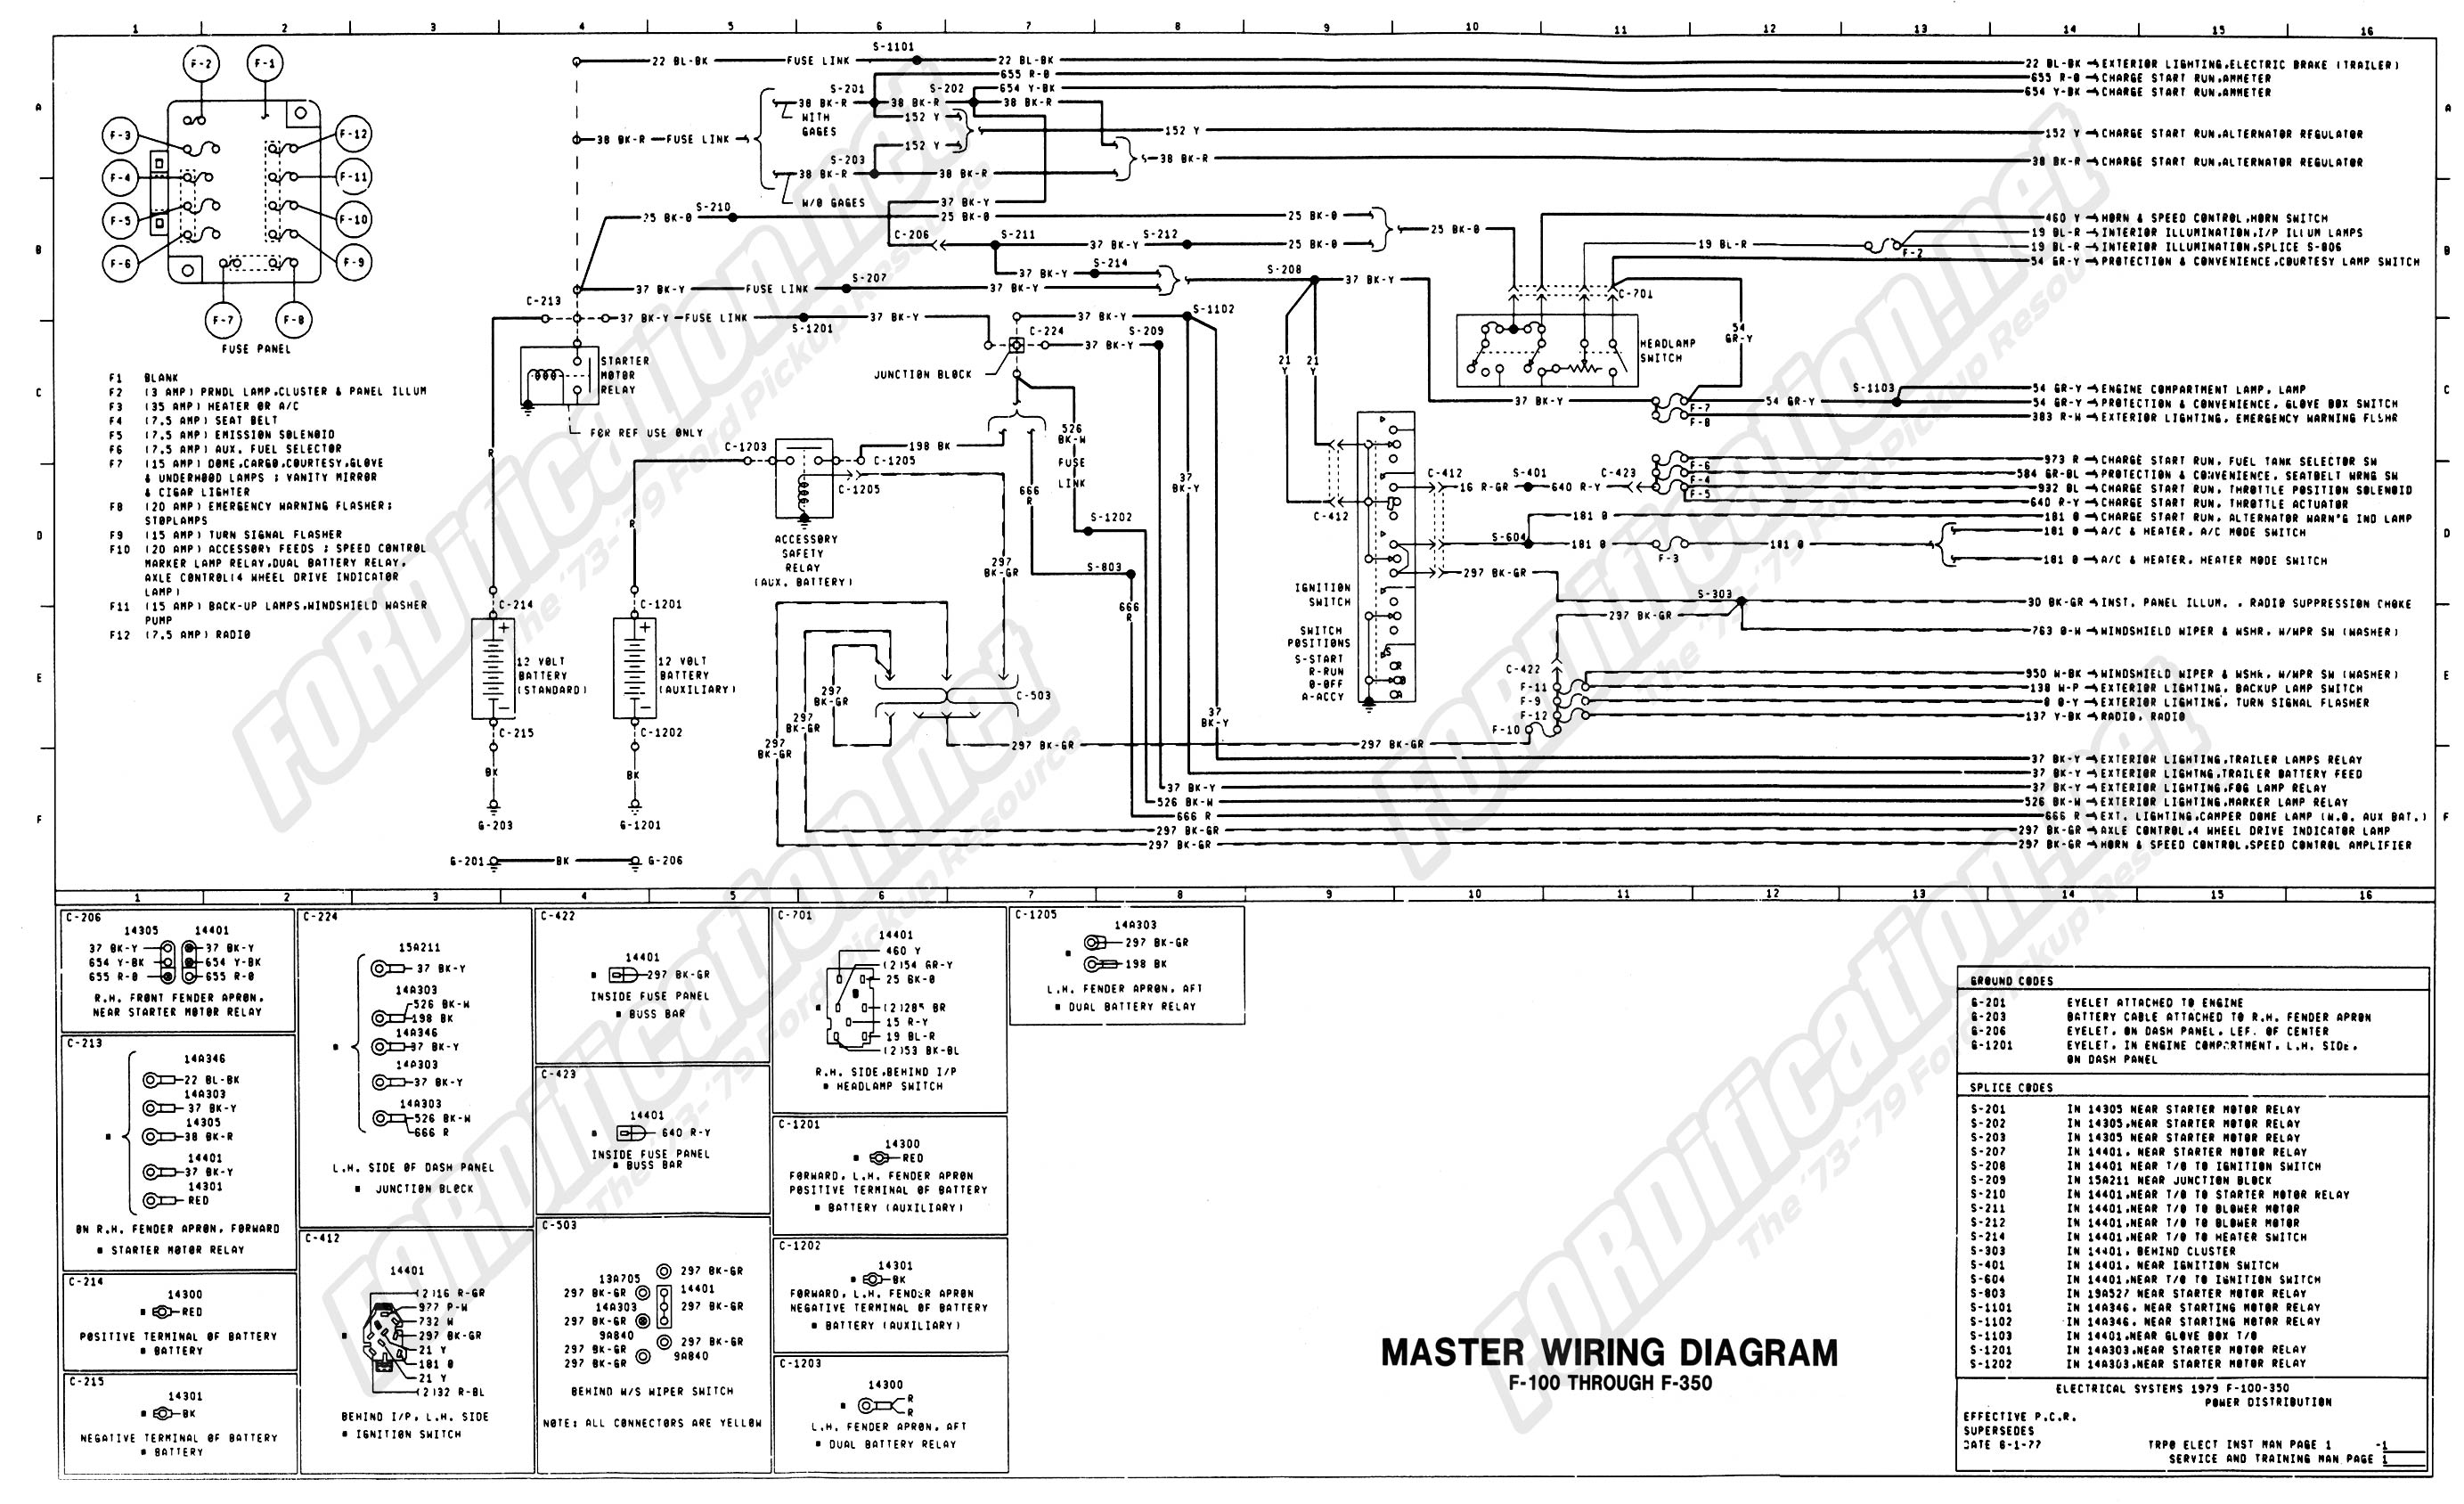 Wiring diagrams for 1979 ford truck #1